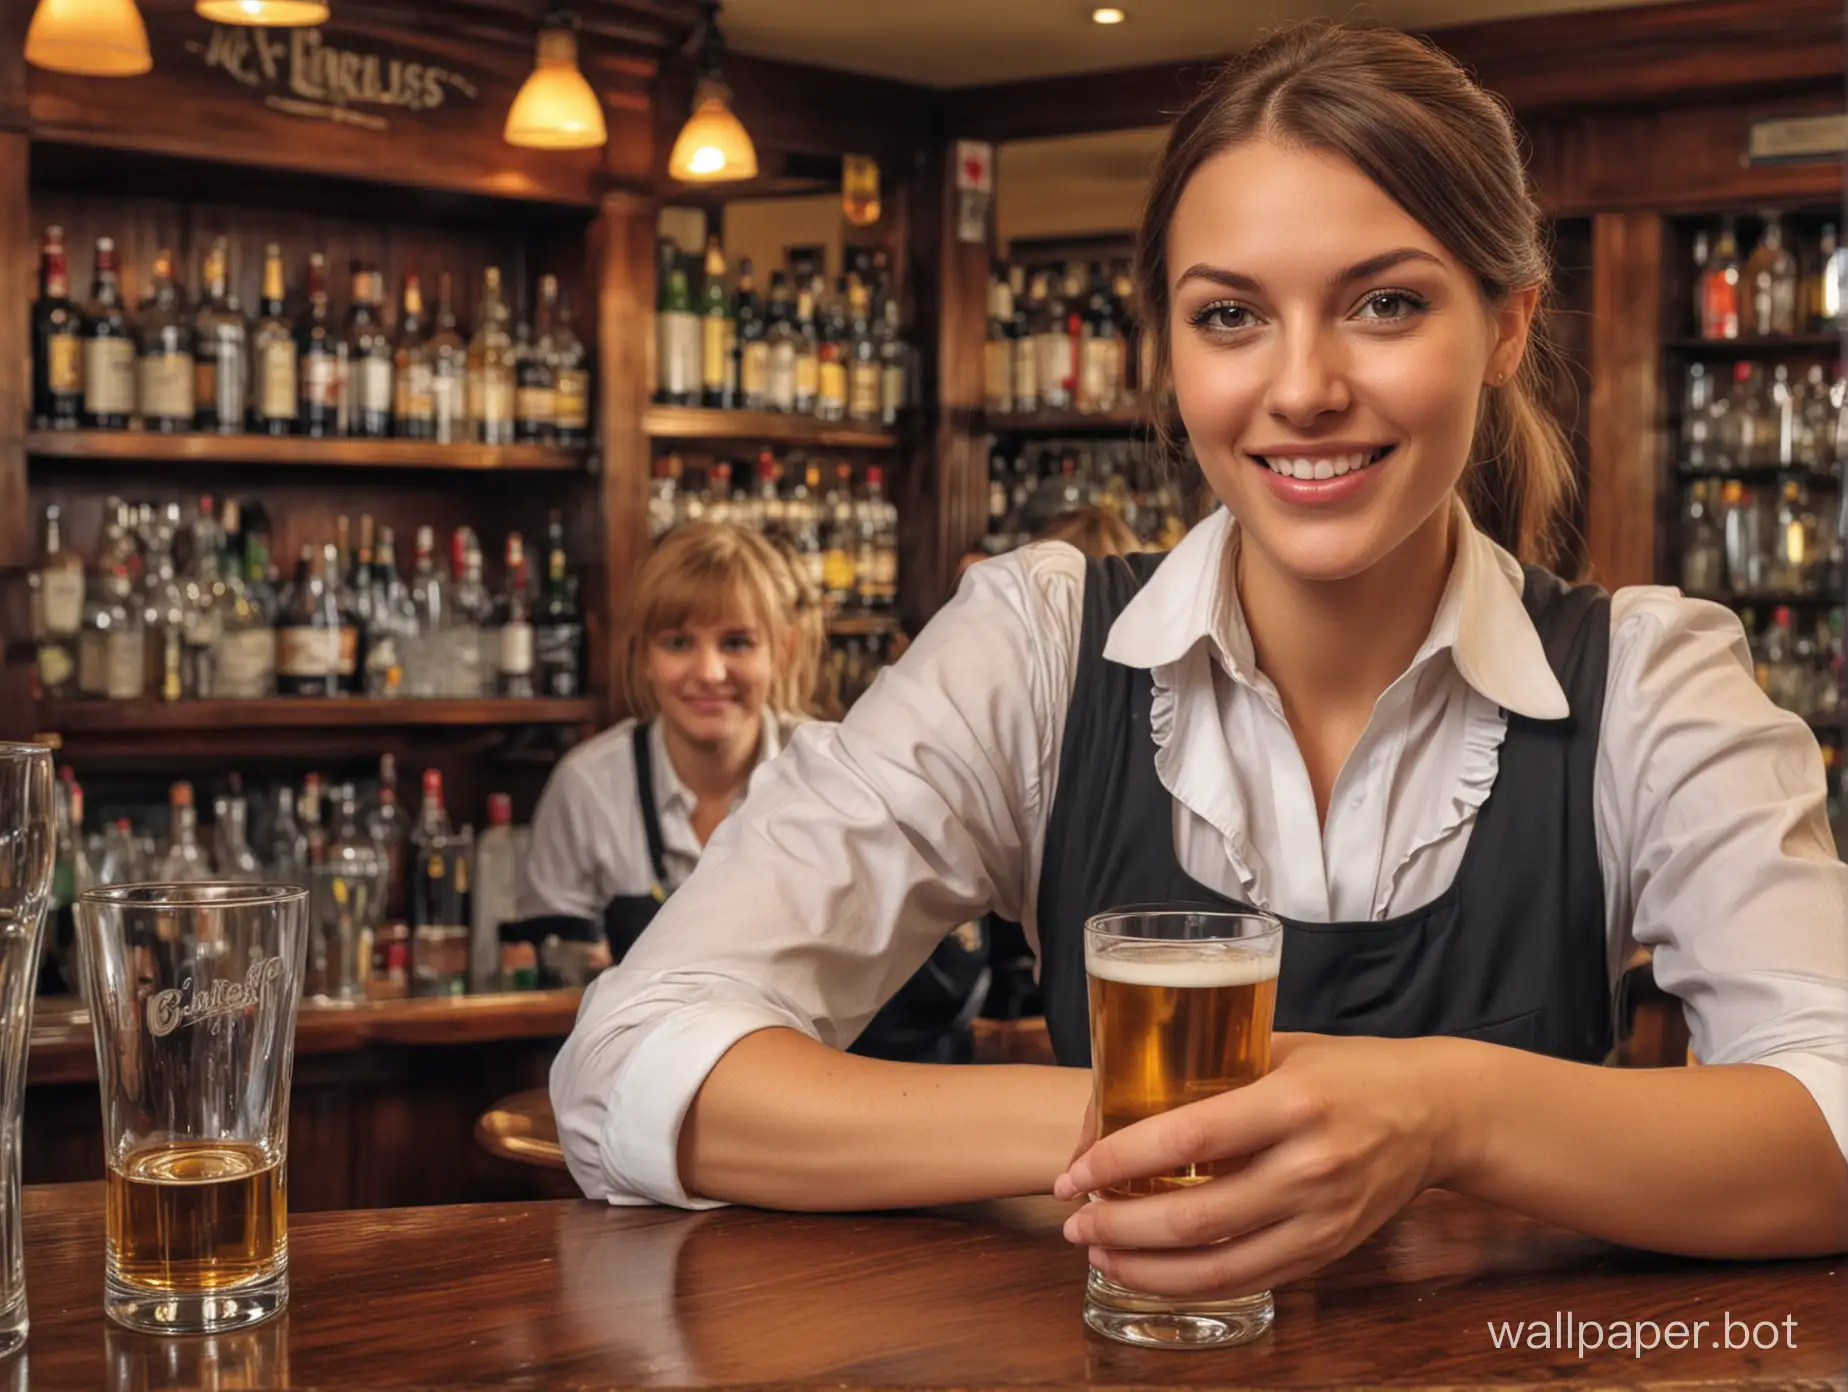 Waitress serving drinks in an English pub, hdr, 16:9